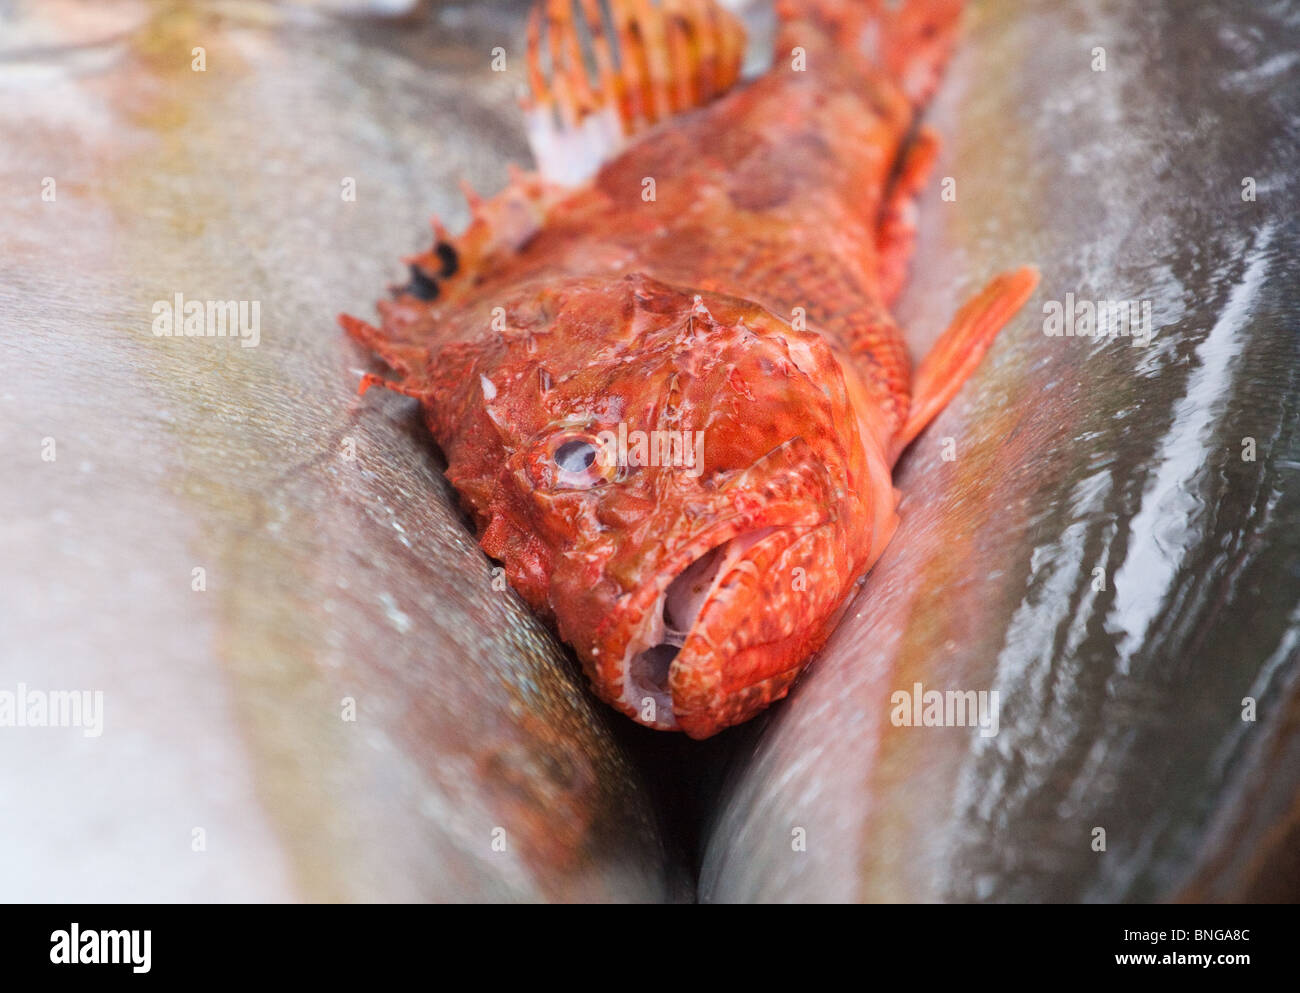 Freshly caught red fish lying on two larger fish Stock Photo